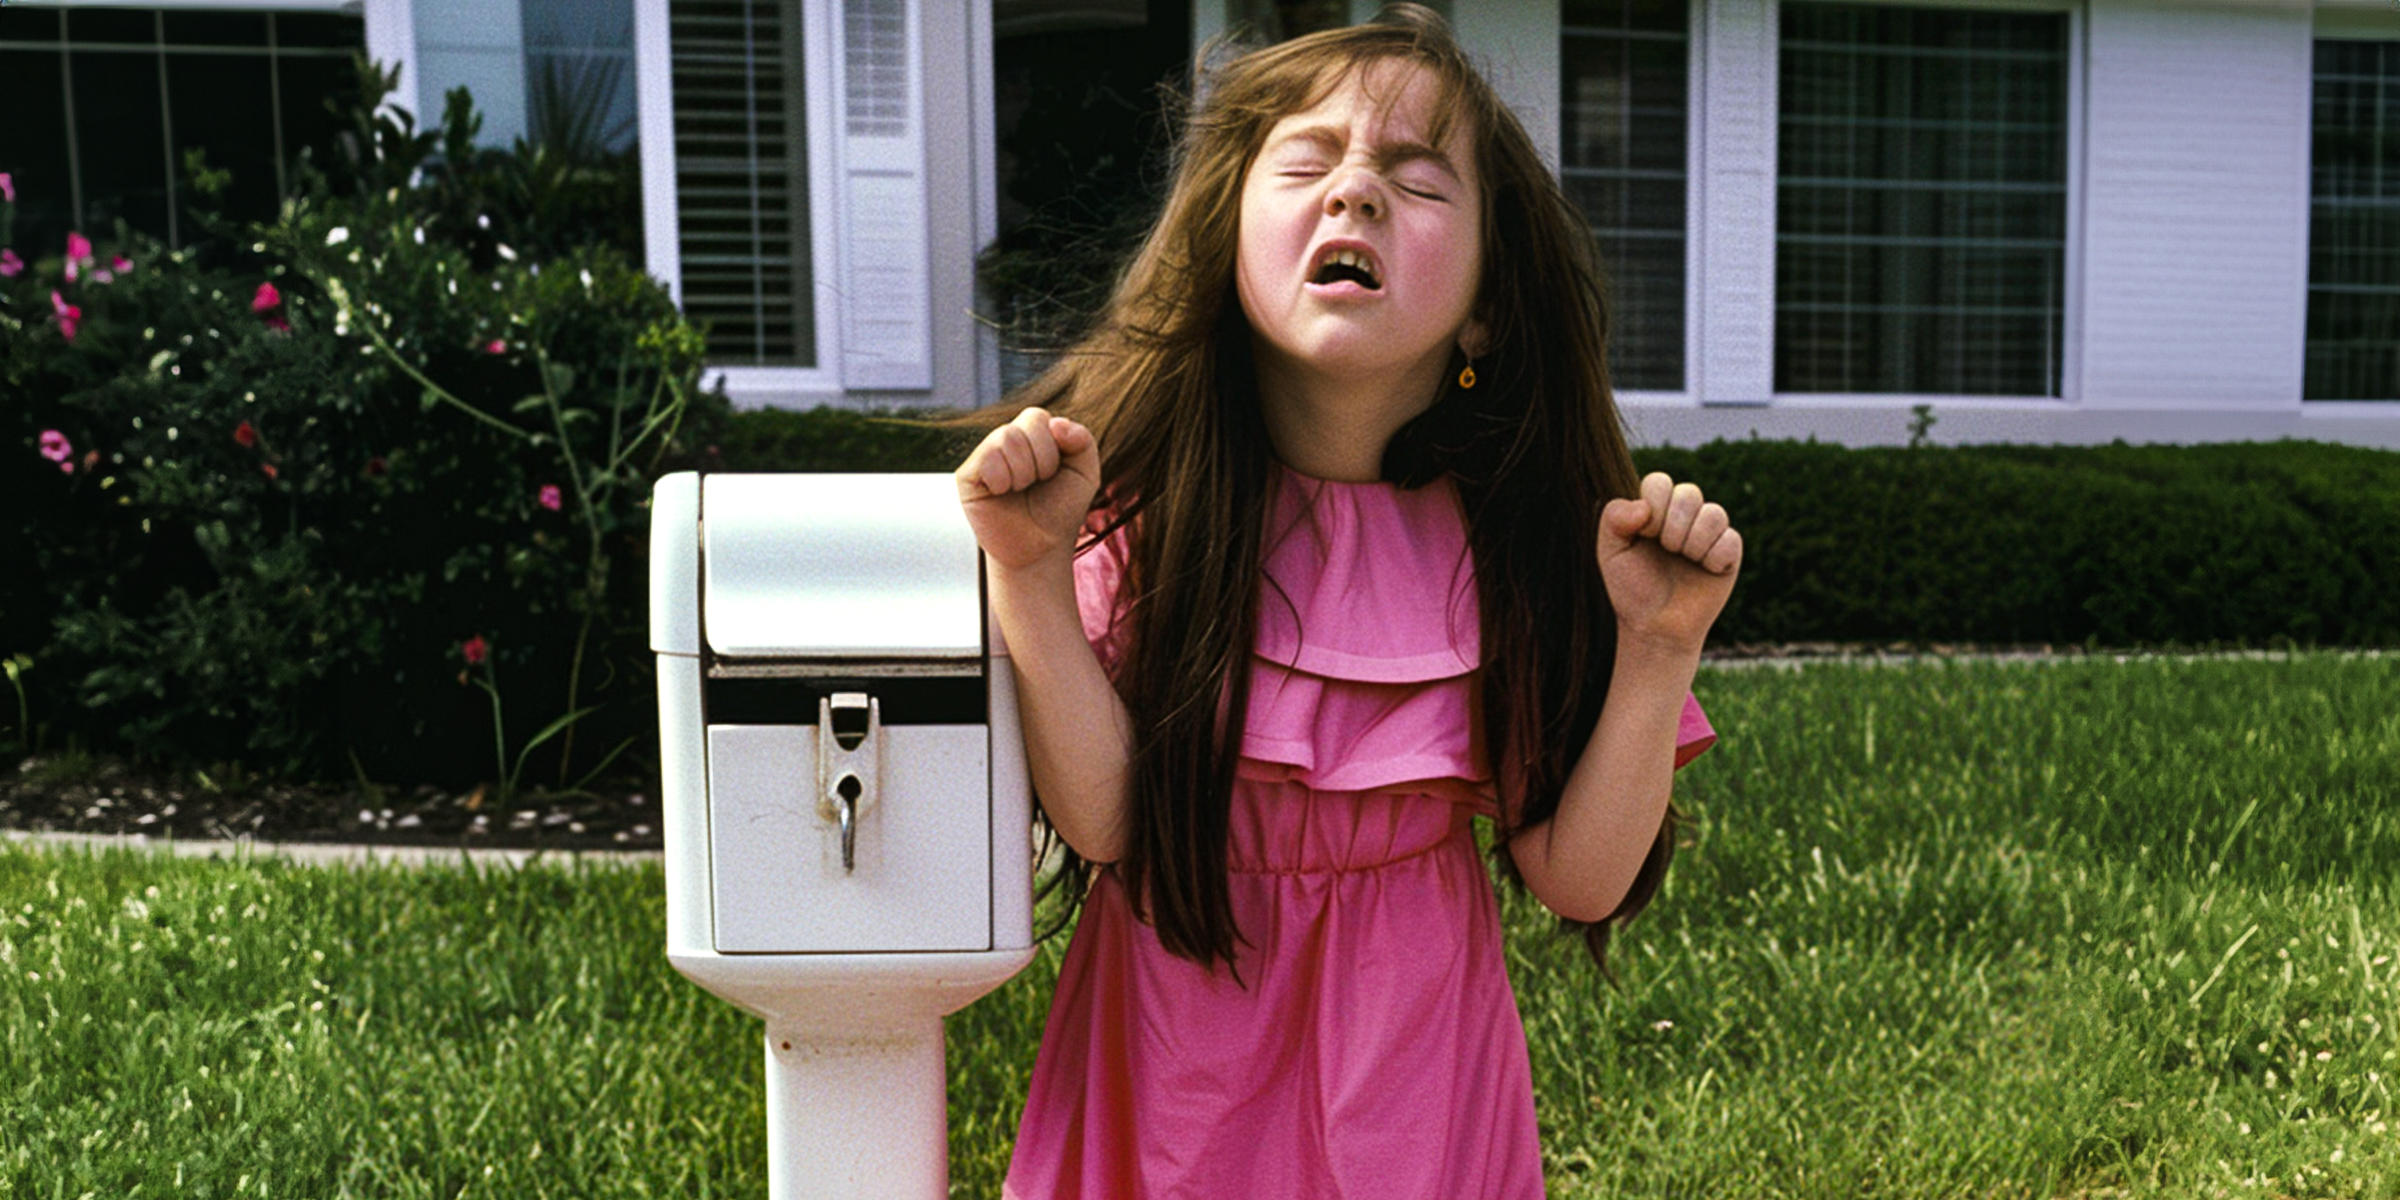 A little girl crying standing next to a mailbox | Source: Amomama